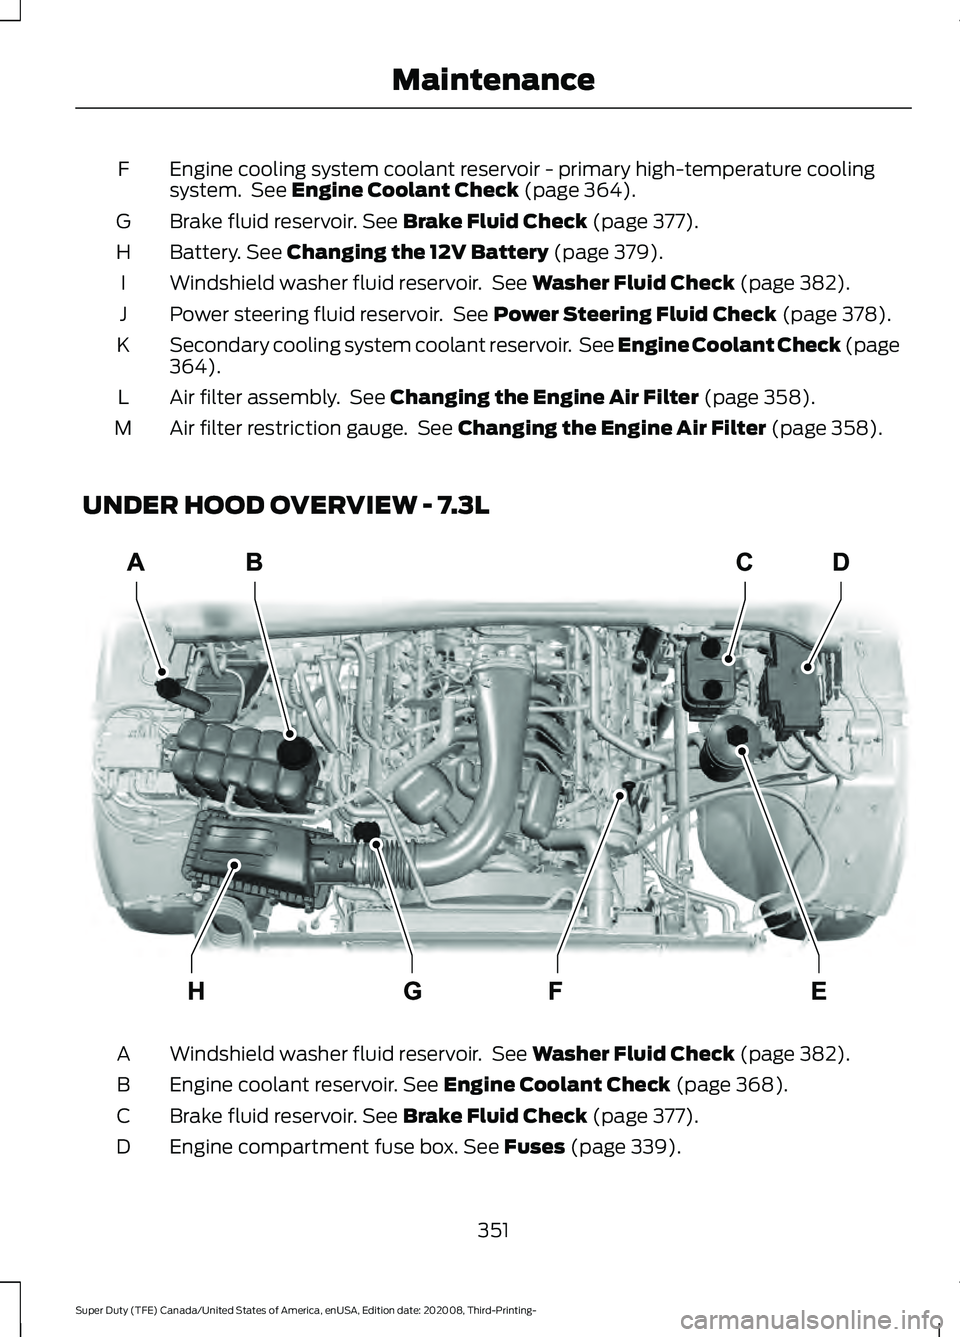 FORD F-450 2021 User Guide Engine cooling system coolant reservoir - primary high-temperature cooling
system.  See Engine Coolant Check (page 364).
F
Brake fluid reservoir.
 See Brake Fluid Check (page 377).
G
Battery.
 See Cha